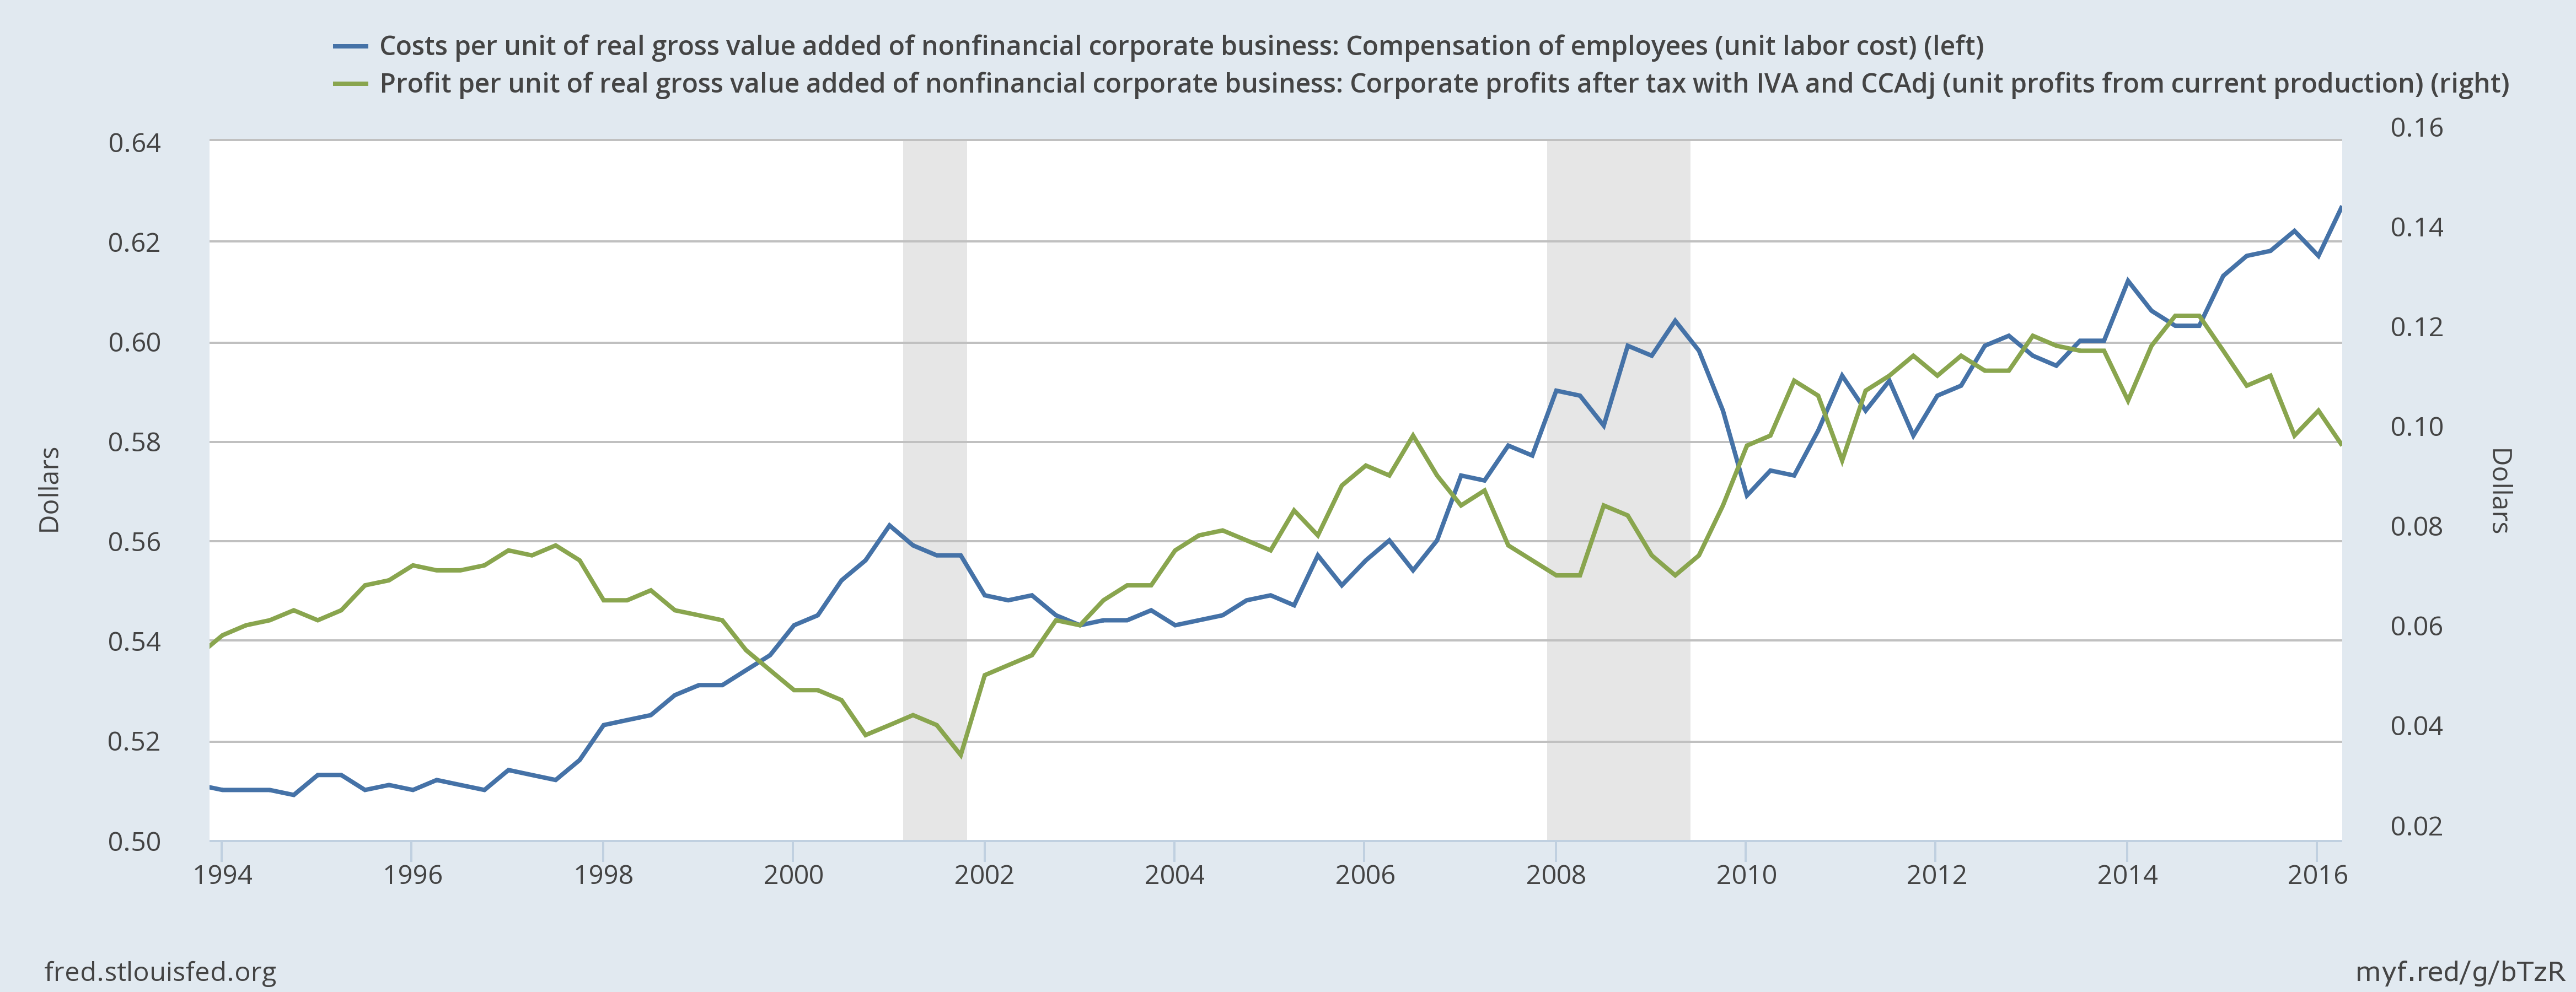 Profits and Employee Costs per unit of Value Added